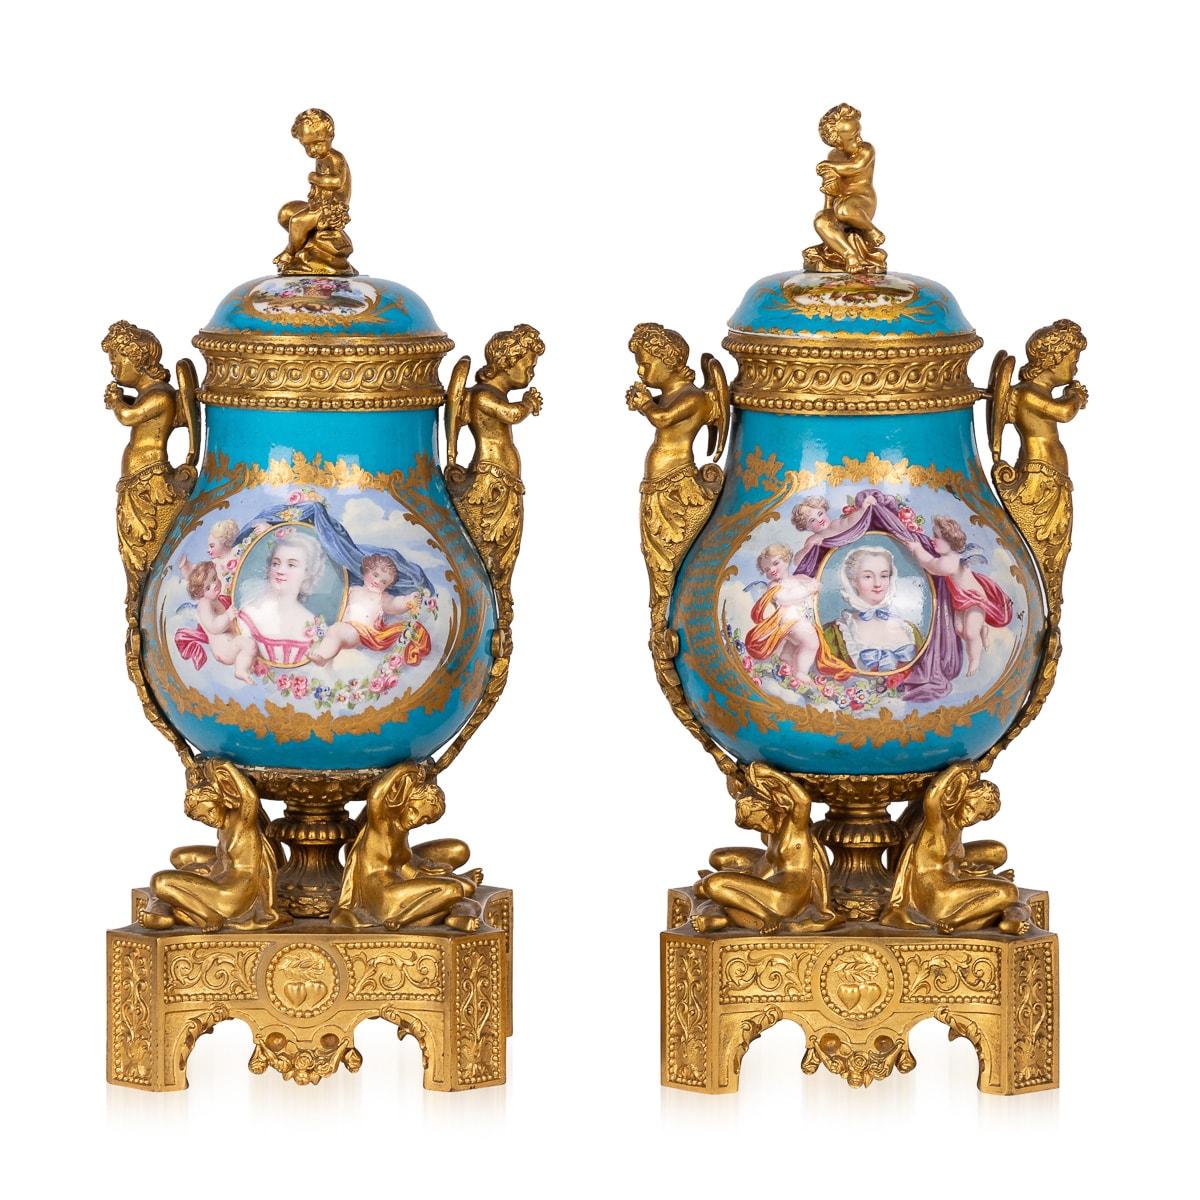 Antique 19th Century French porcelain potpourri vases, adorned with ormolu mounts in the Sèvres style. Each vase boasts two graceful handles shaped like cherubs, adorned with delicate floral motifs cascading down to the base. The lids feature